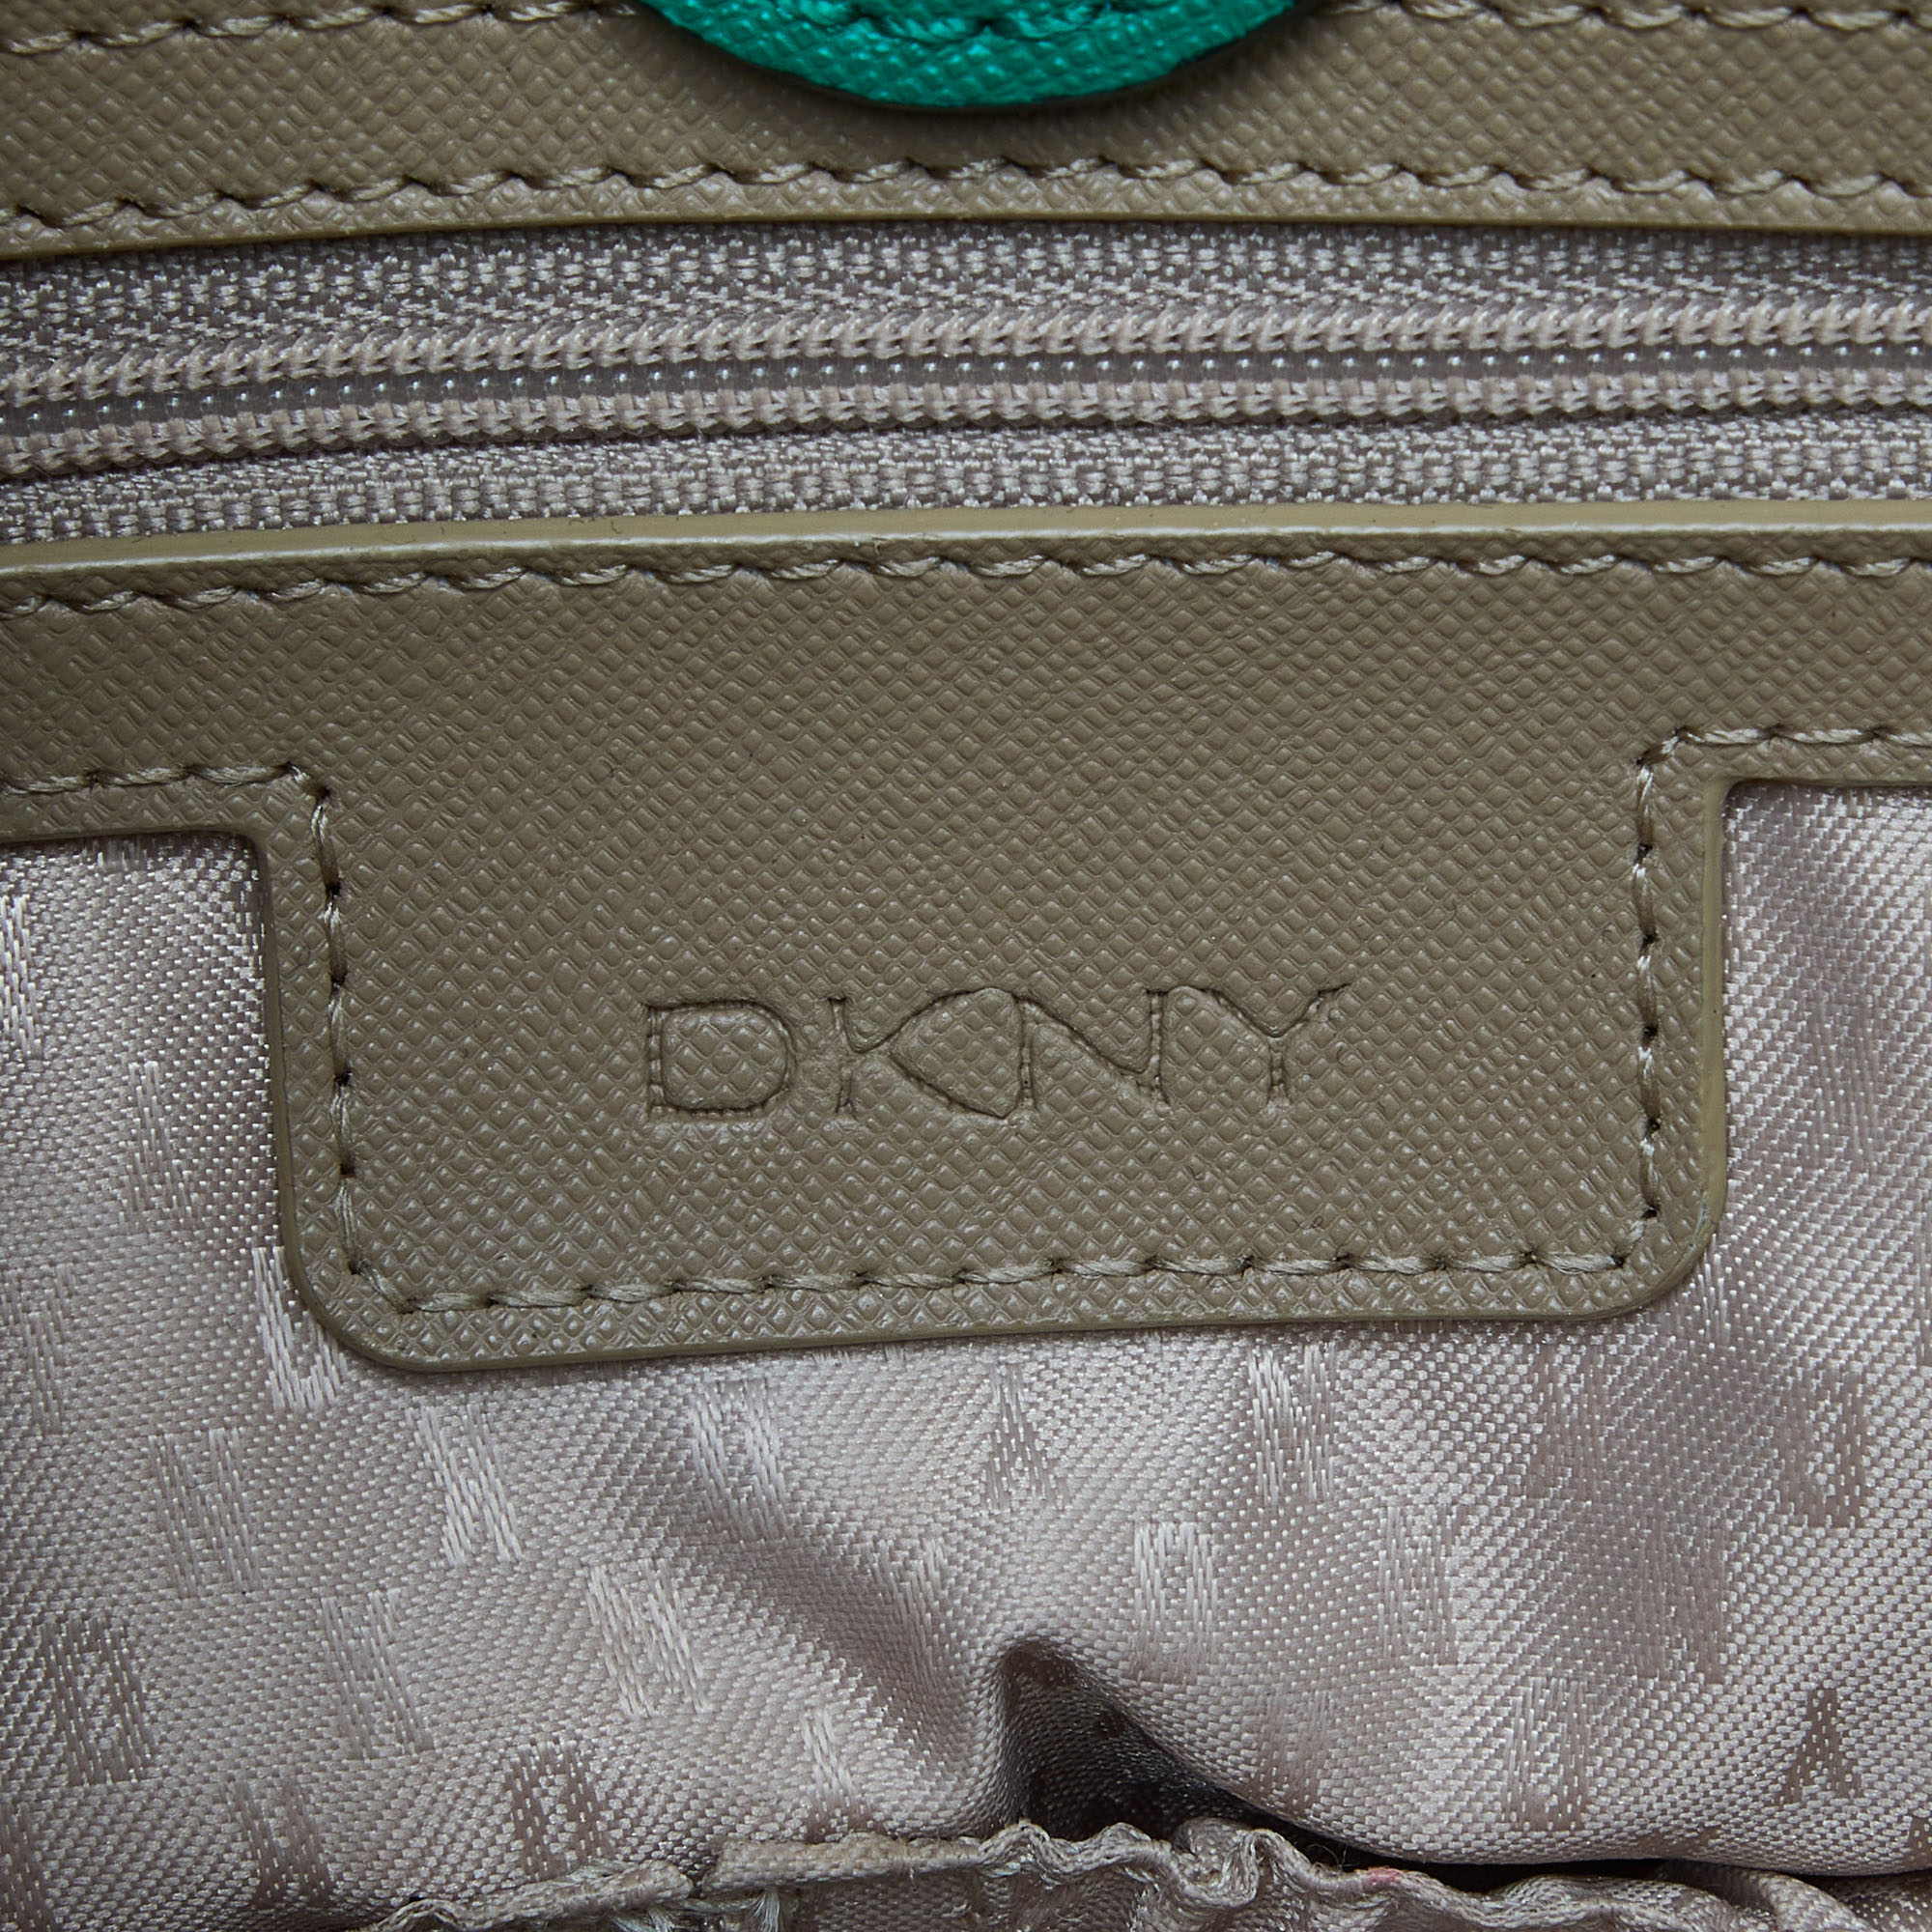 DKNY Green Leather Bryant Park Double Zip Tote